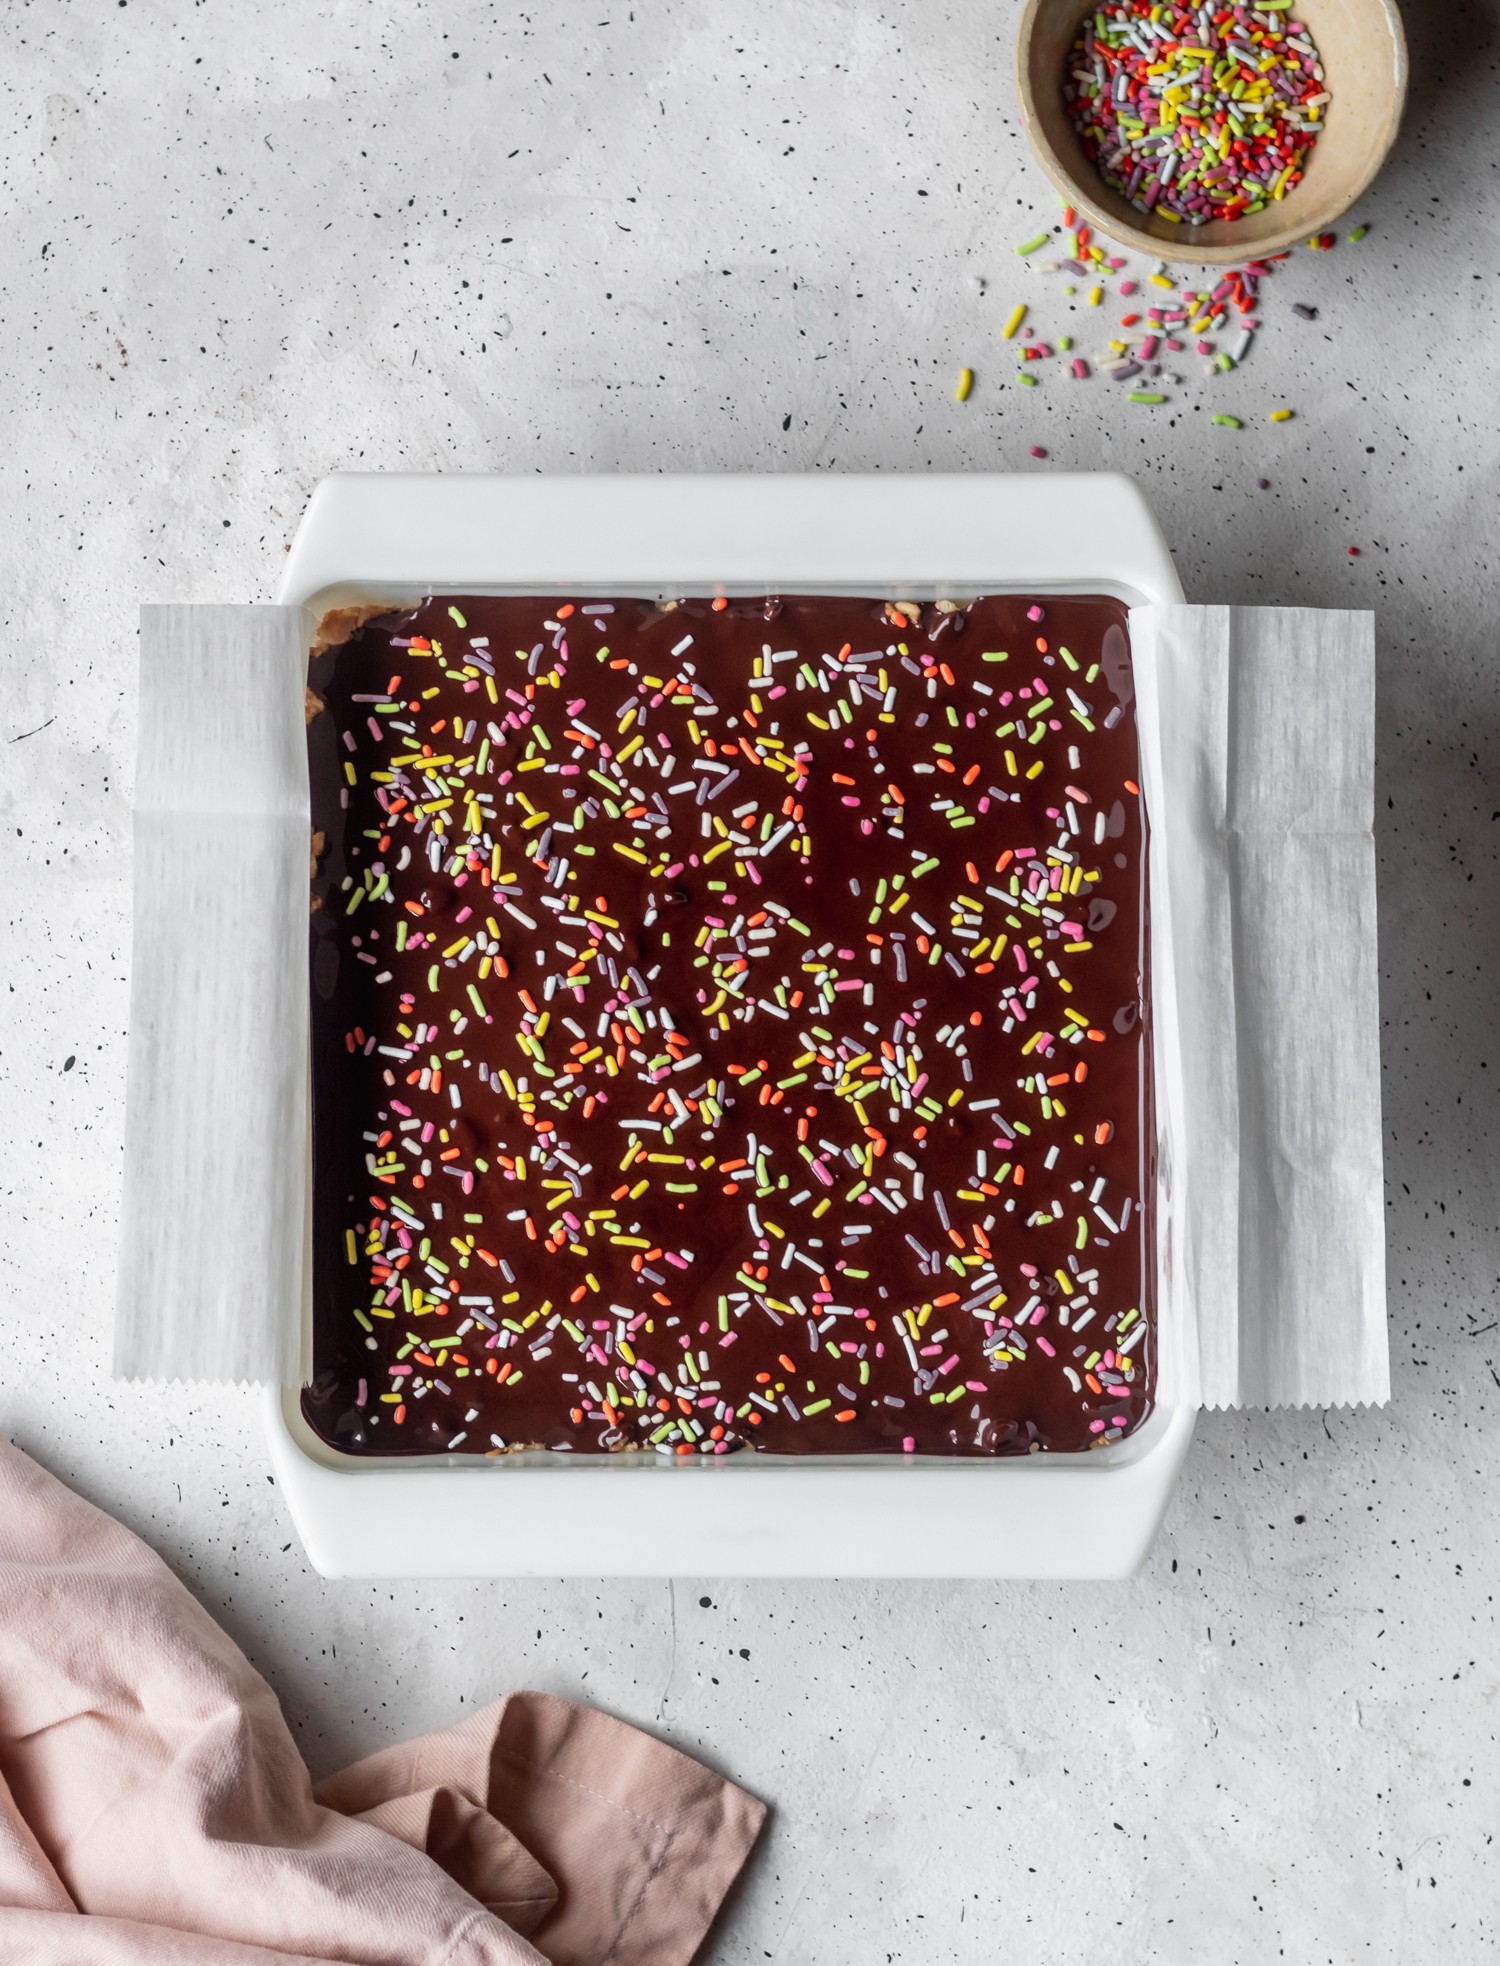 Chocolate-y dessert bars with rainbow sprinkles in a white, speckled surface.